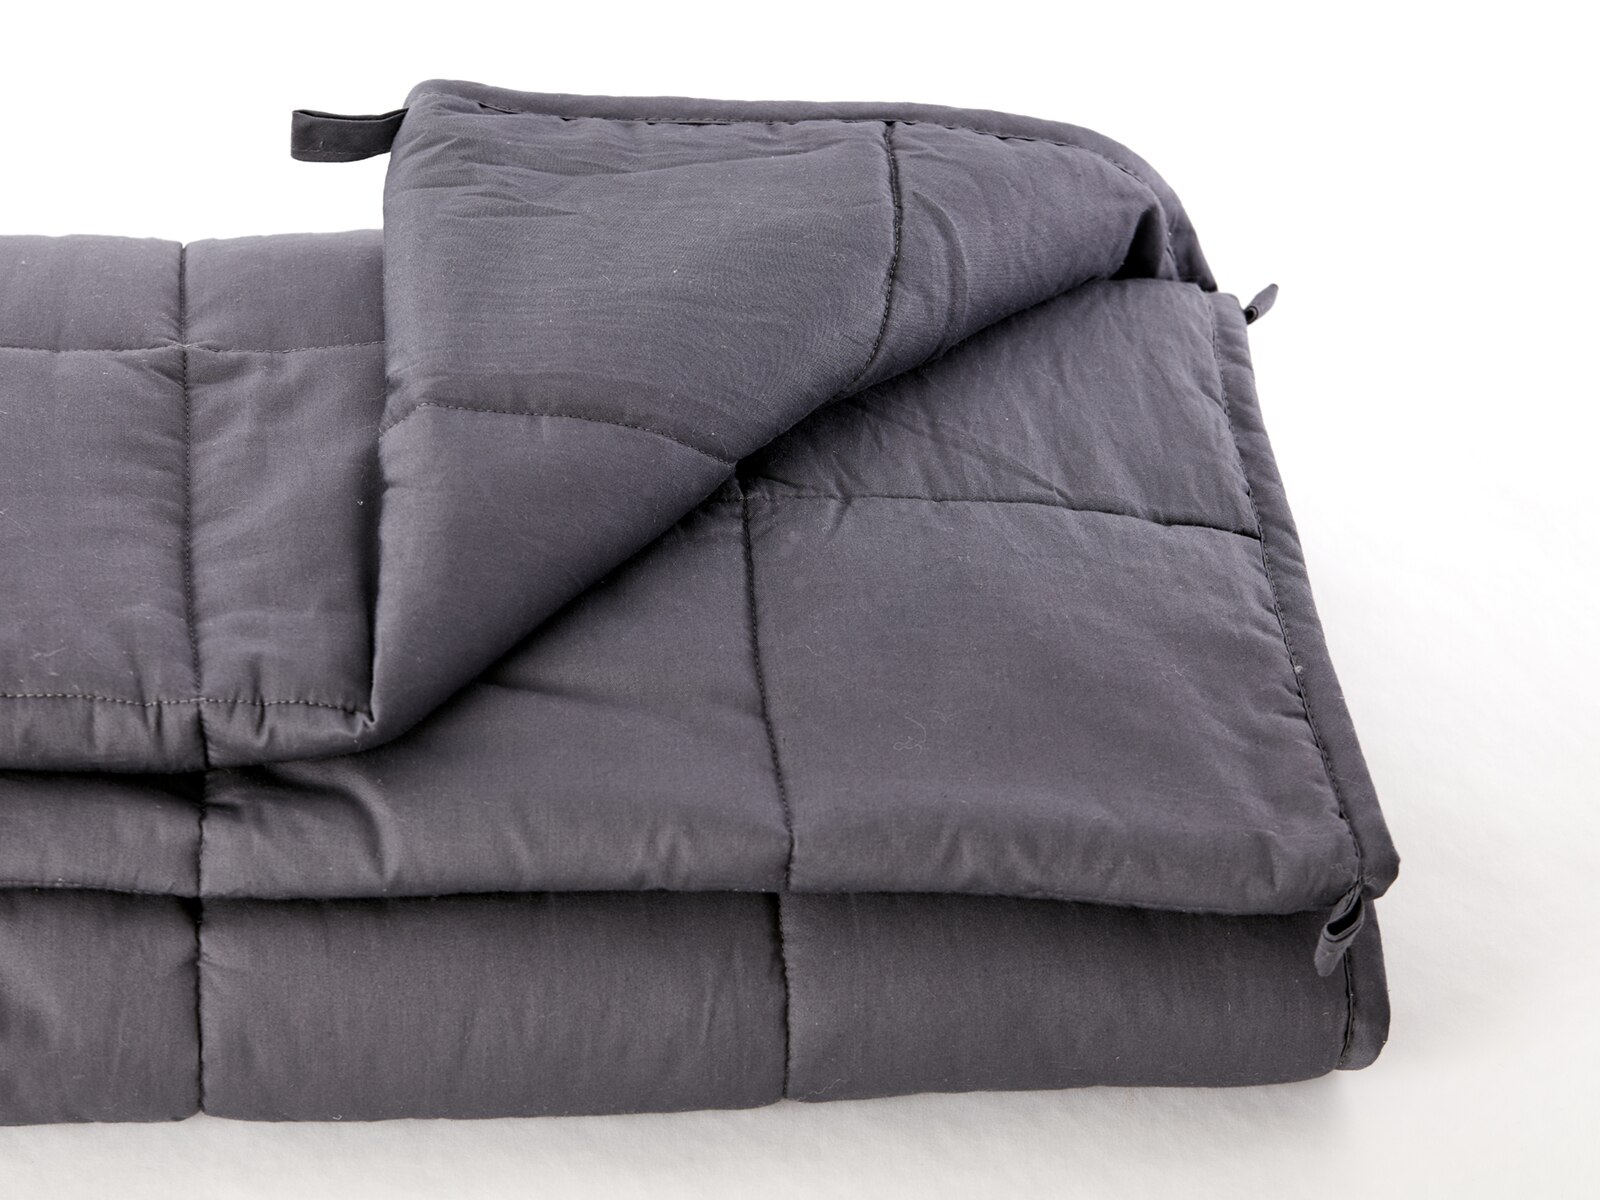 Proper 15 lb Weighted Blanket